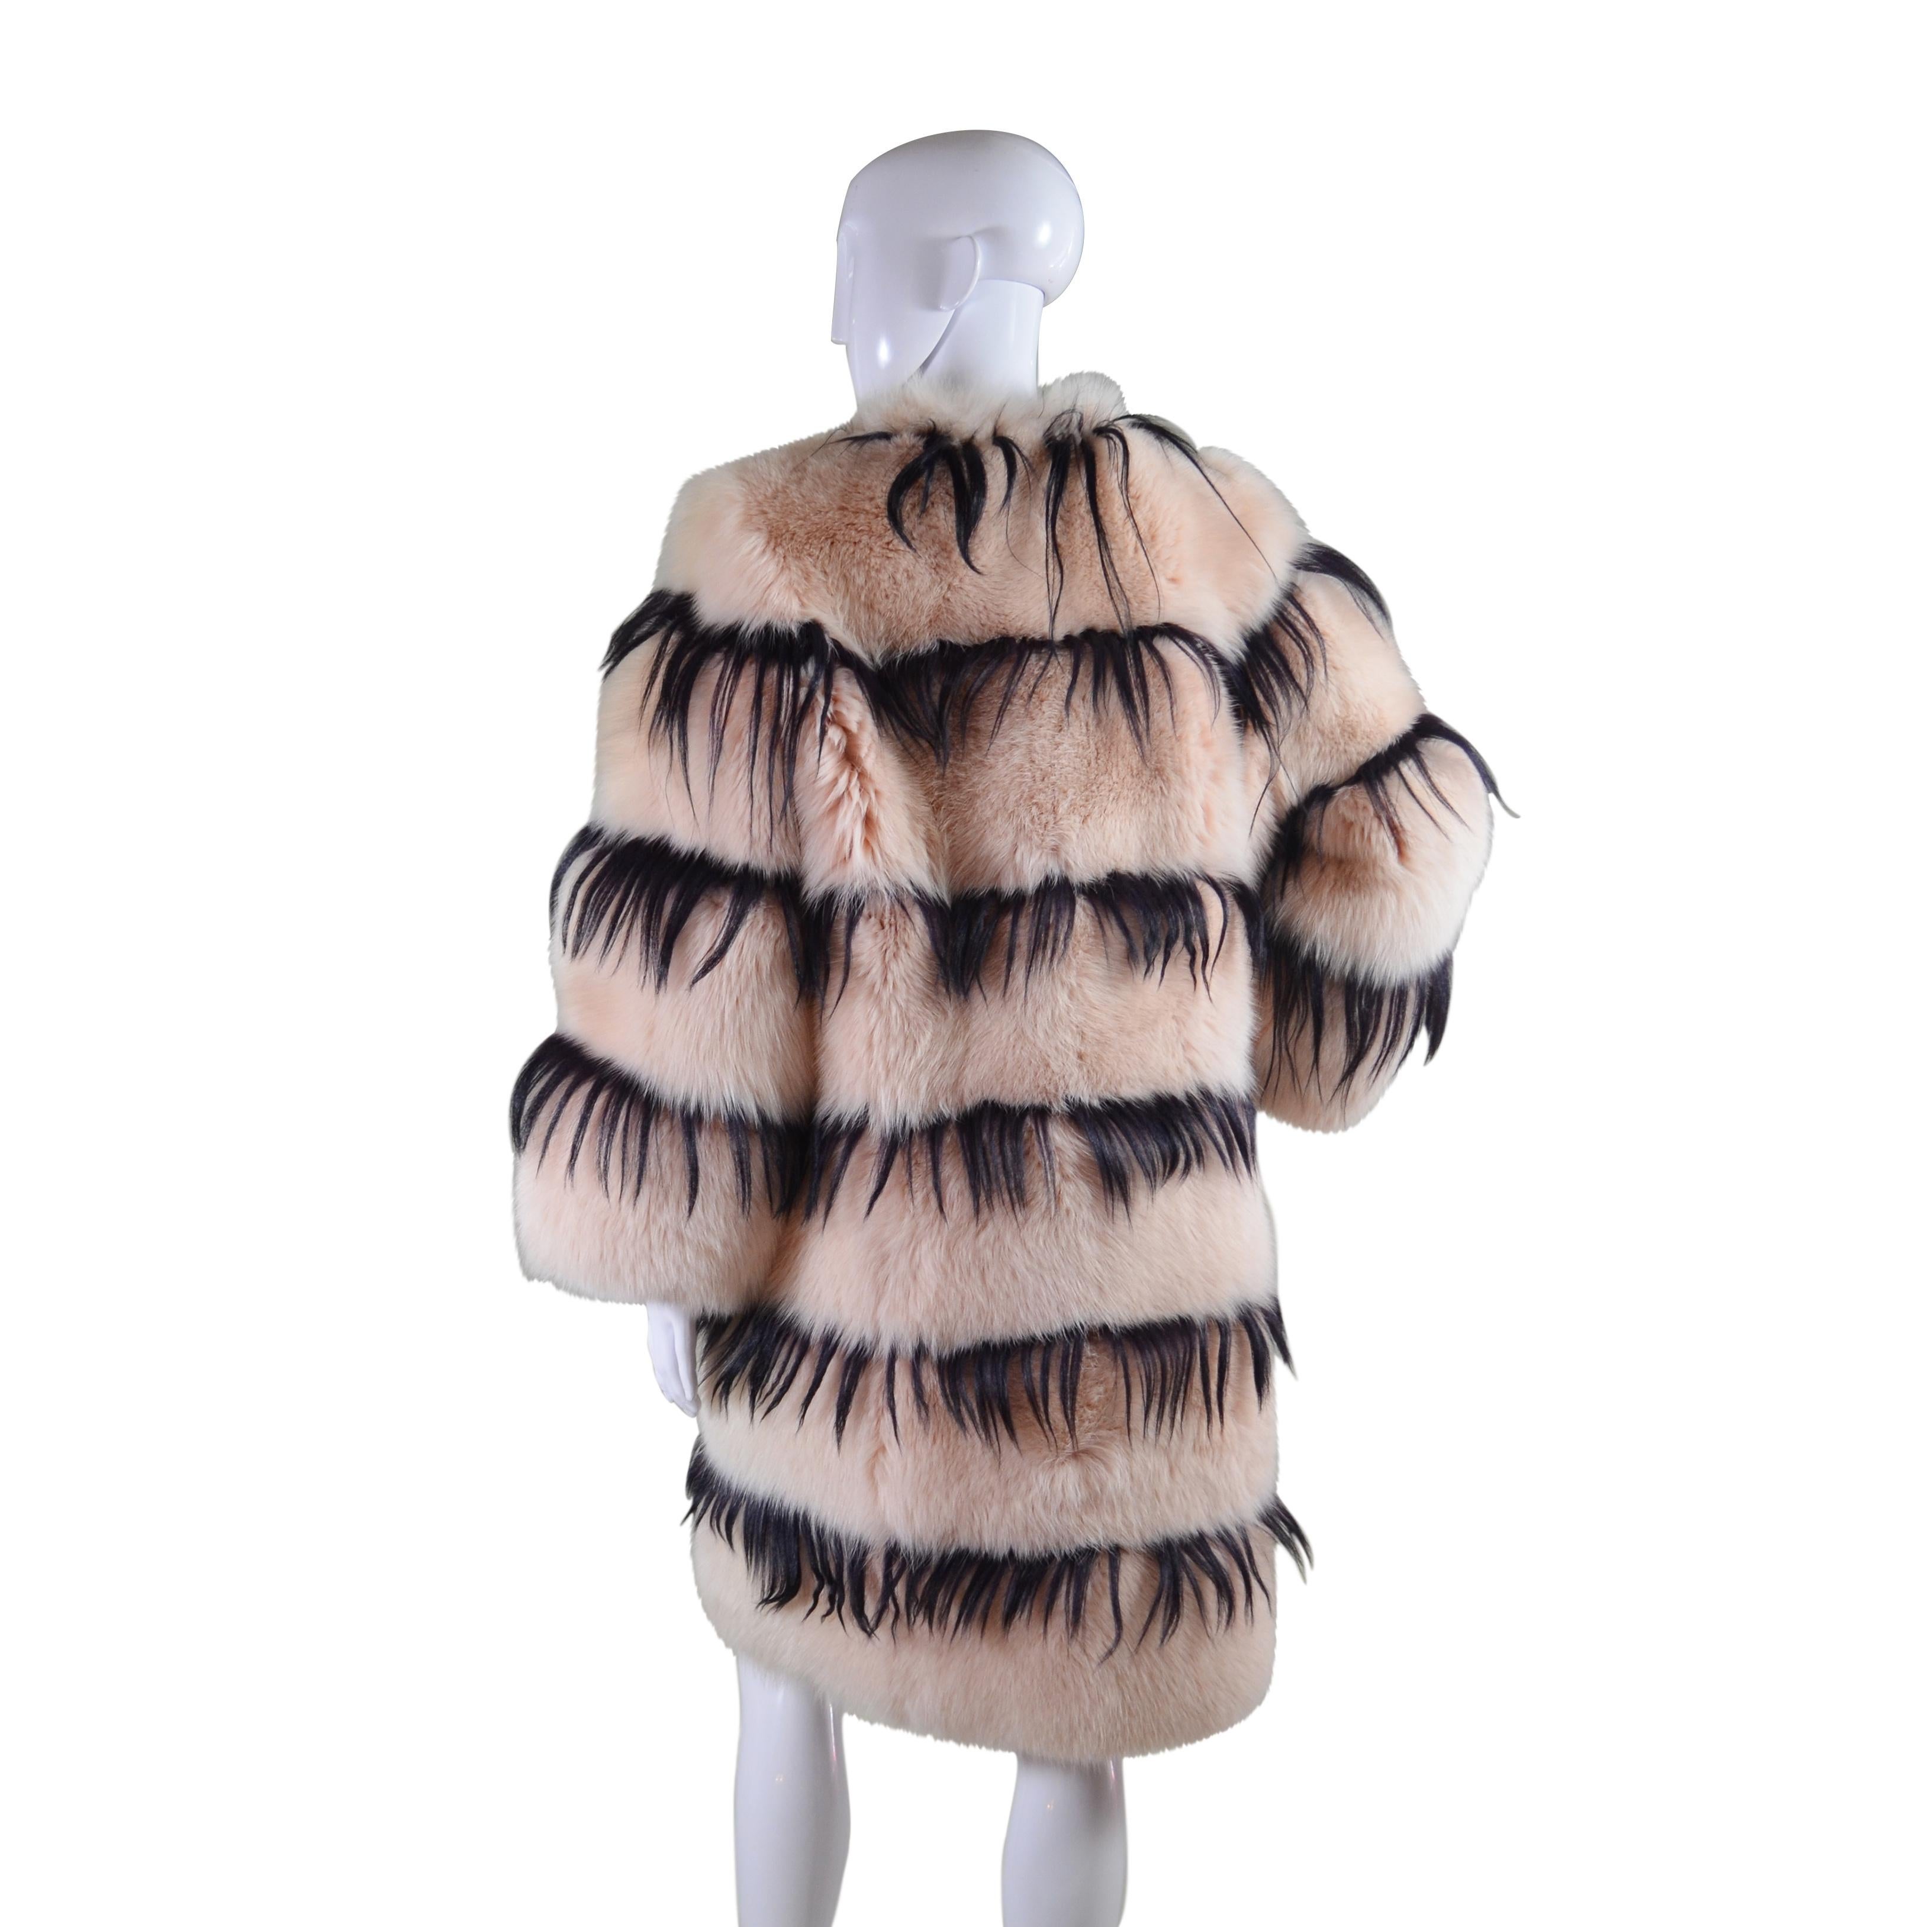 Beautiful MISSONI pale pink and black saga fox fur coat with black goat hair accents from the 2003 runway collection, look #23 on model Karolina Kurkova and featured in that season's campaign with Kate moss. Colourful silky abstract print lining